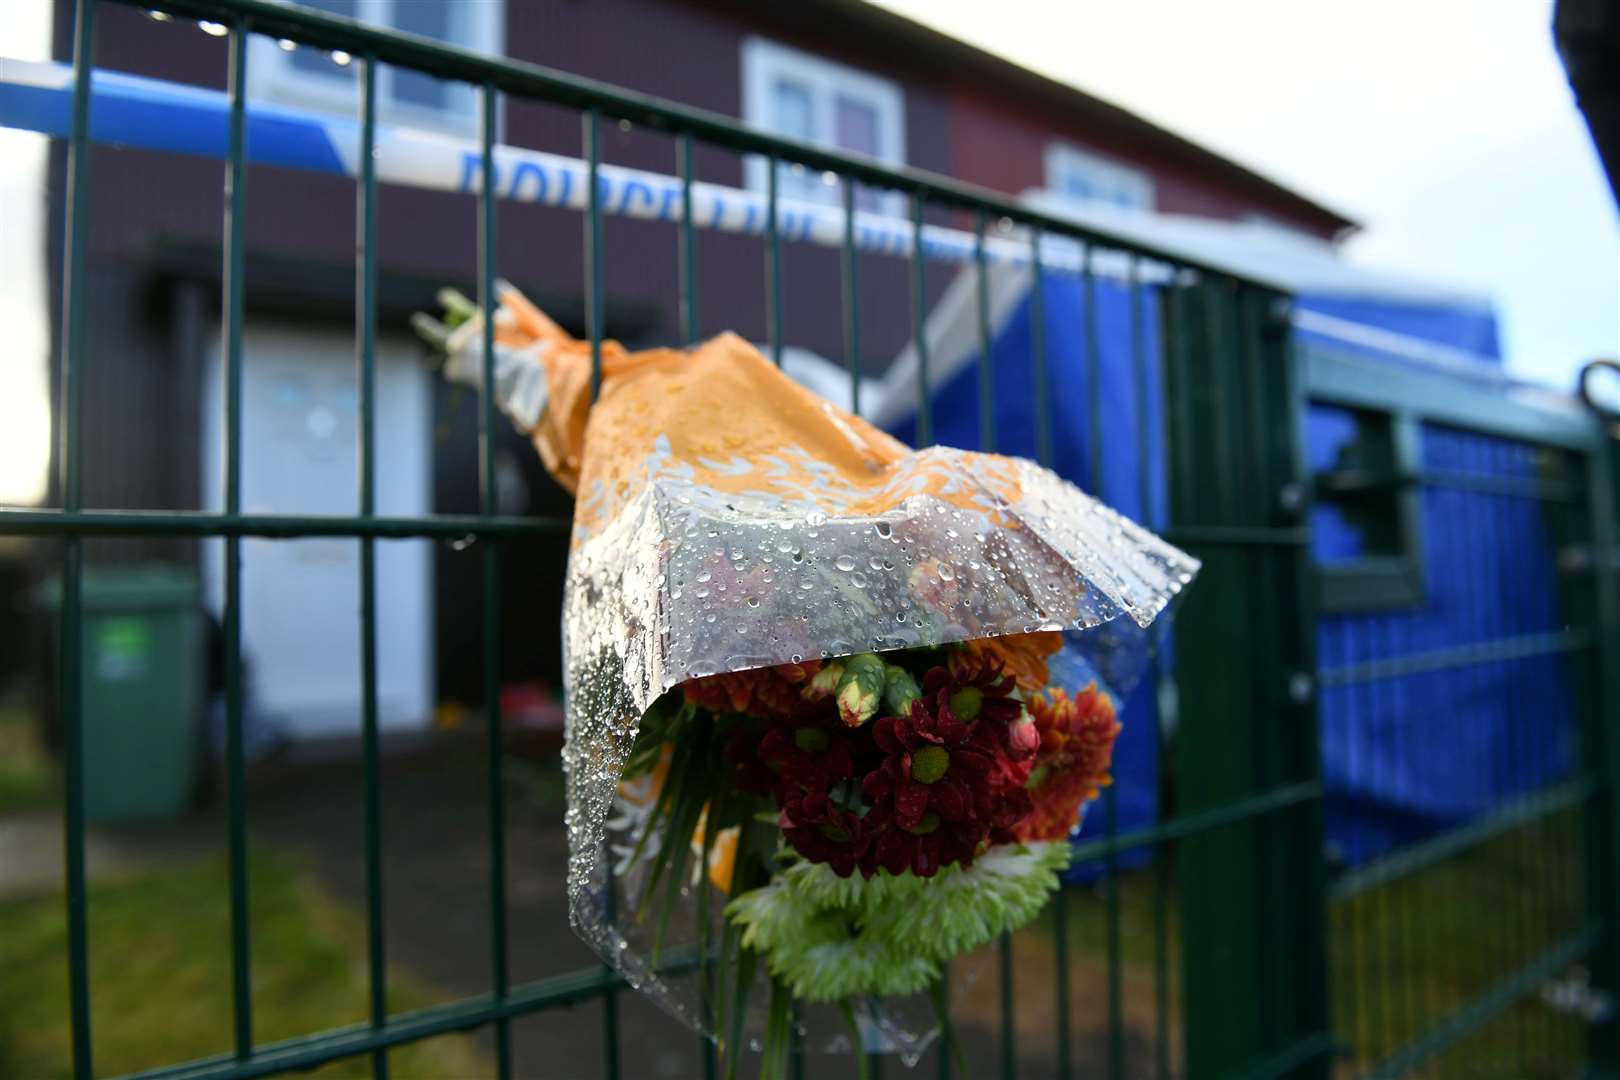 Flowers have been left outside the house where Inverness dad Ross MacGillivray was murdered.